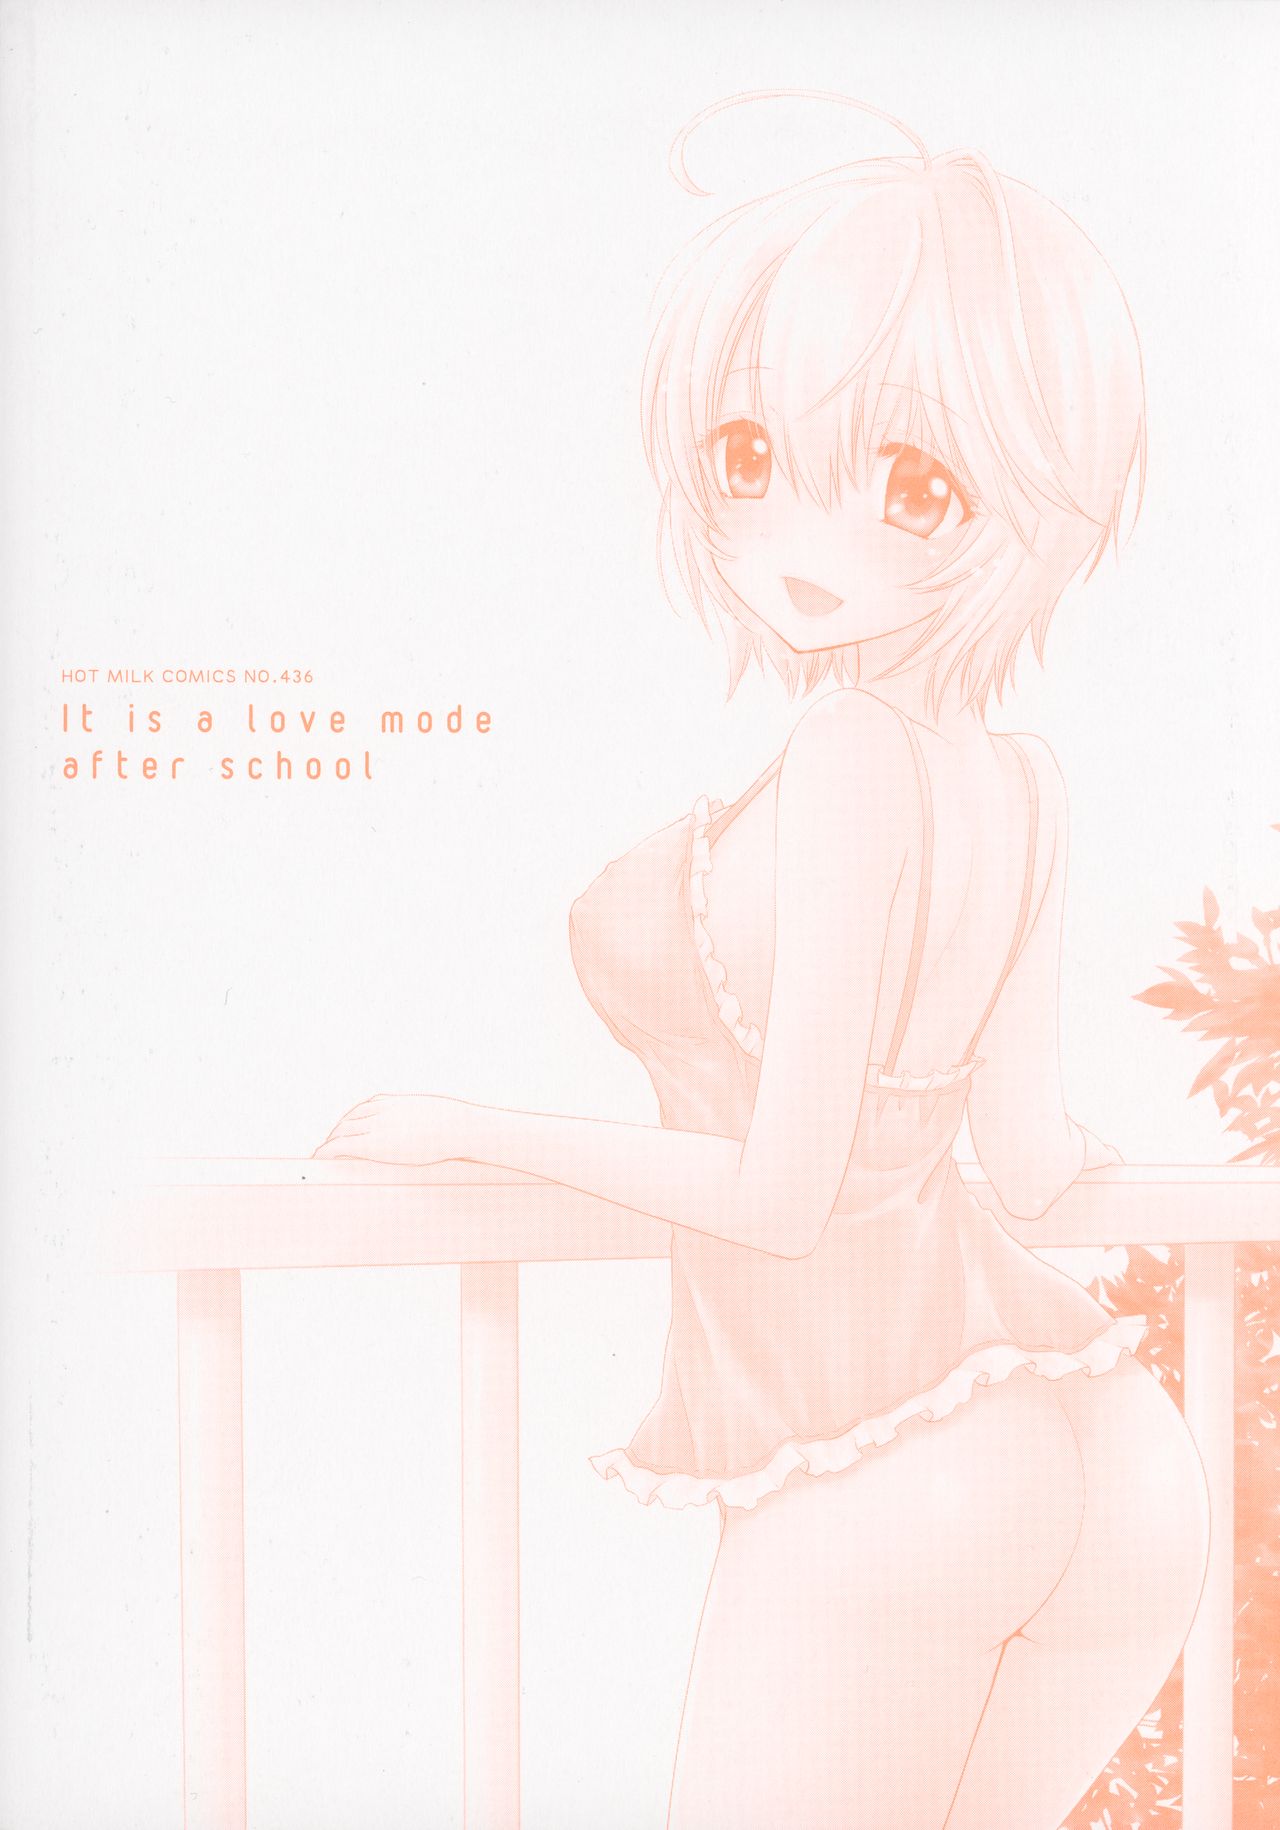 [Ozaki Miray] Houkago Love Mode - It is a love mode after school page 232 full